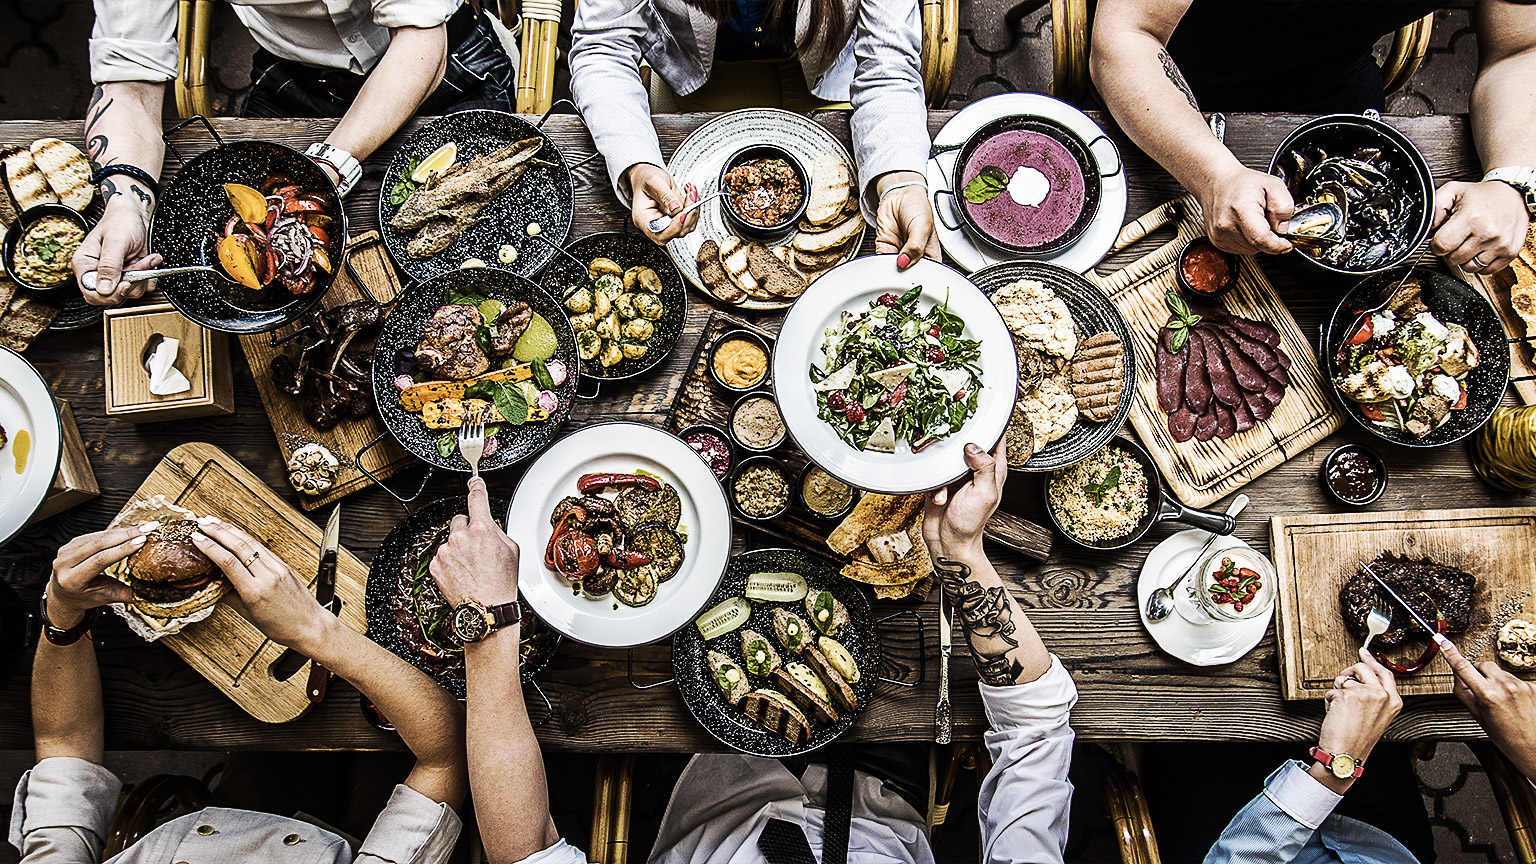 A top shot of a group of people eating healthy